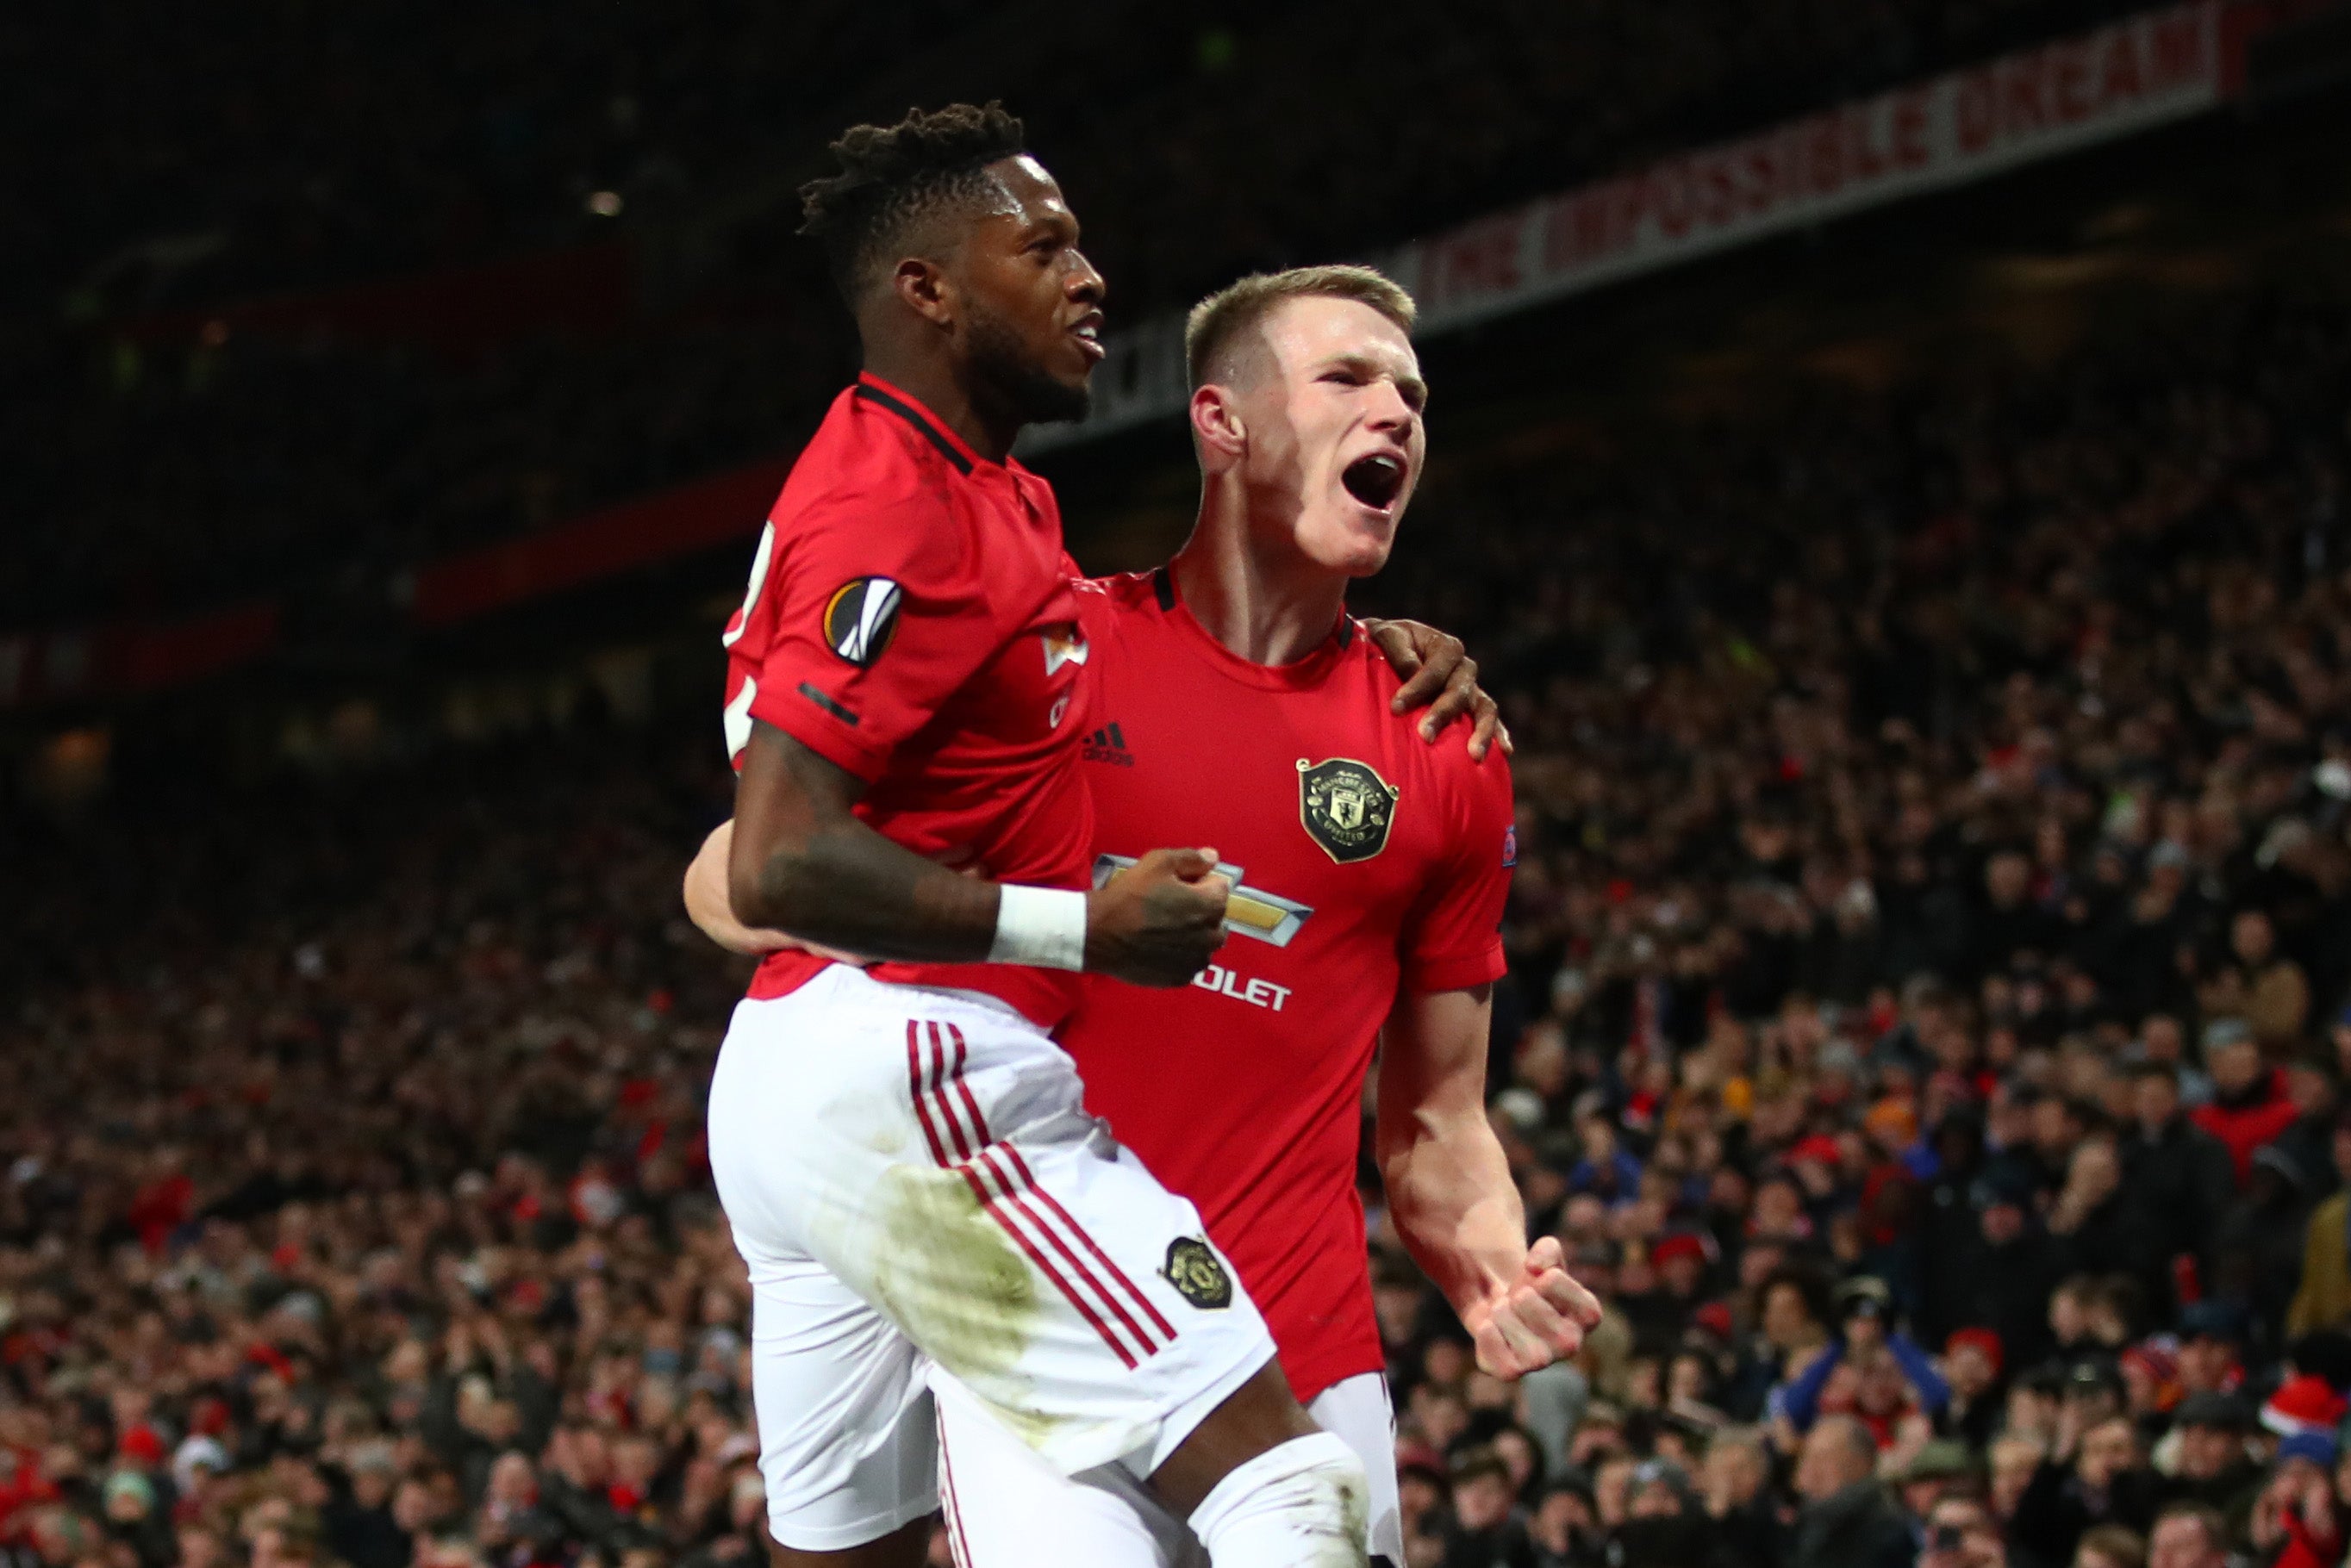 Scott McTominay and Fred have shown their quality at times